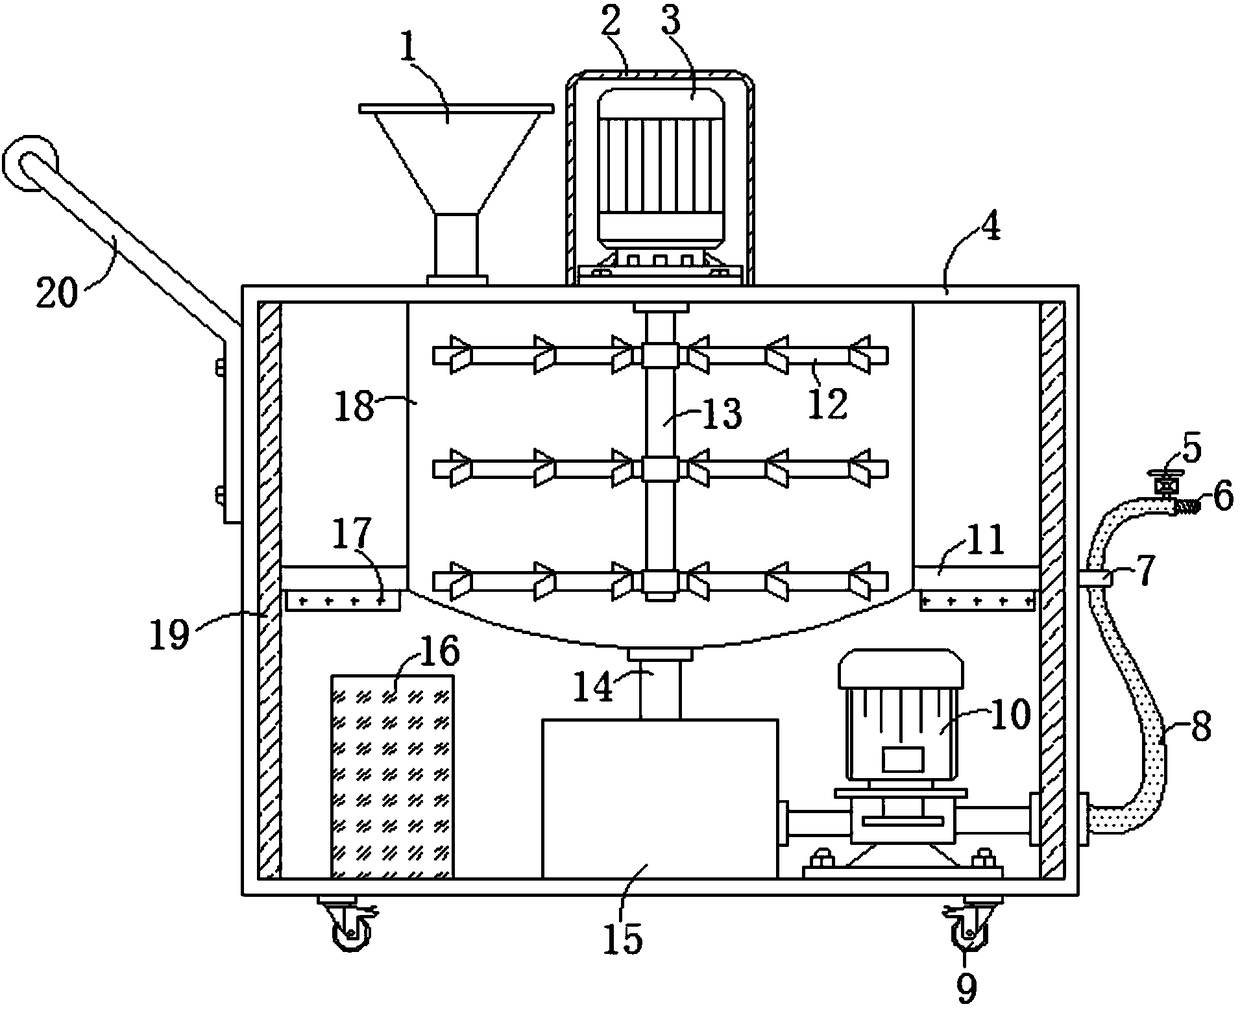 Unshaped refractory material spraying device